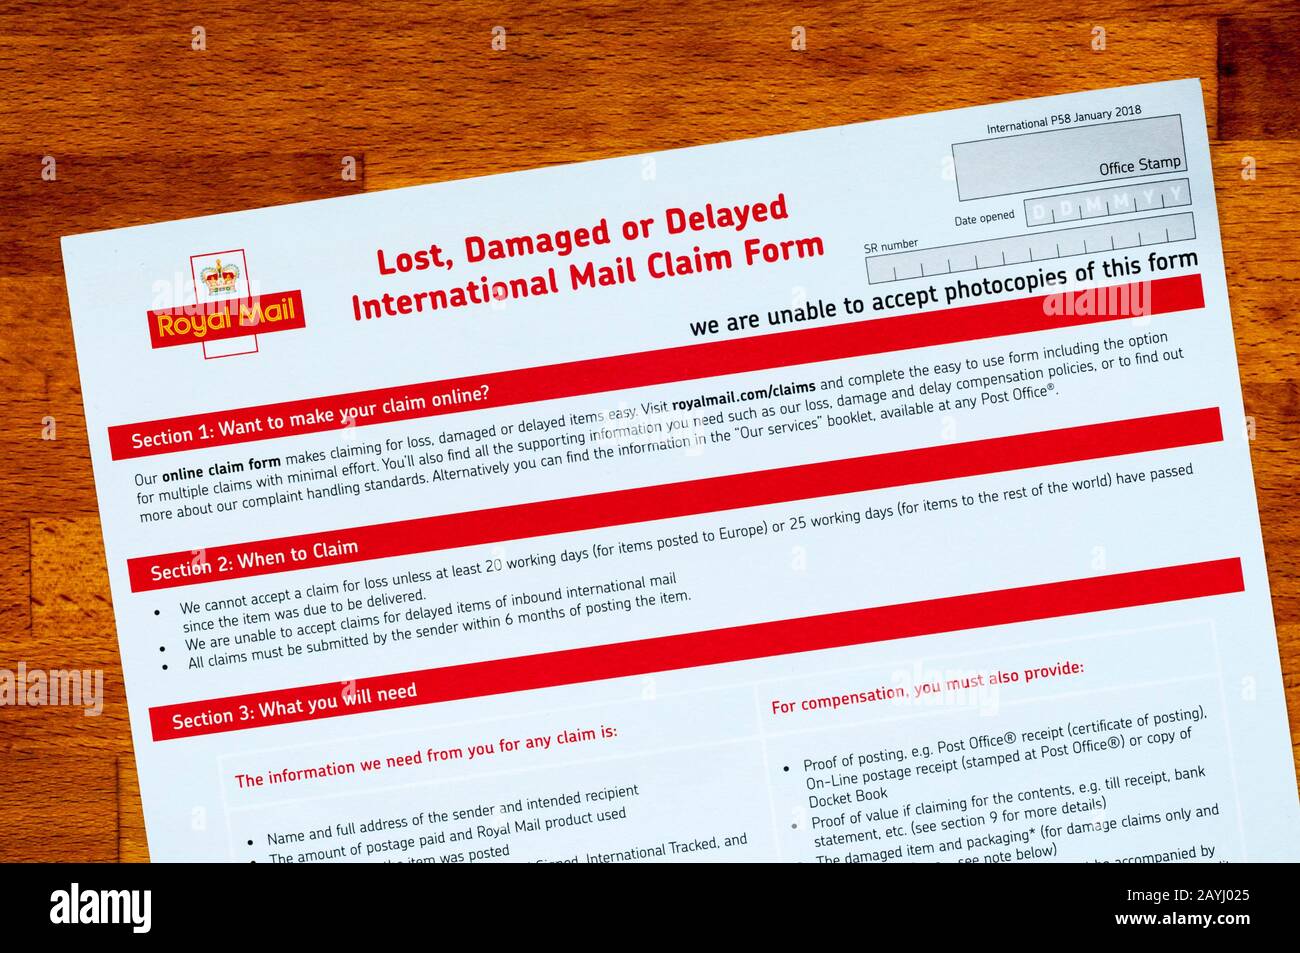 A Royal Mail Lost, Damaged or Delayed International Mail Claim Form. Stock Photo